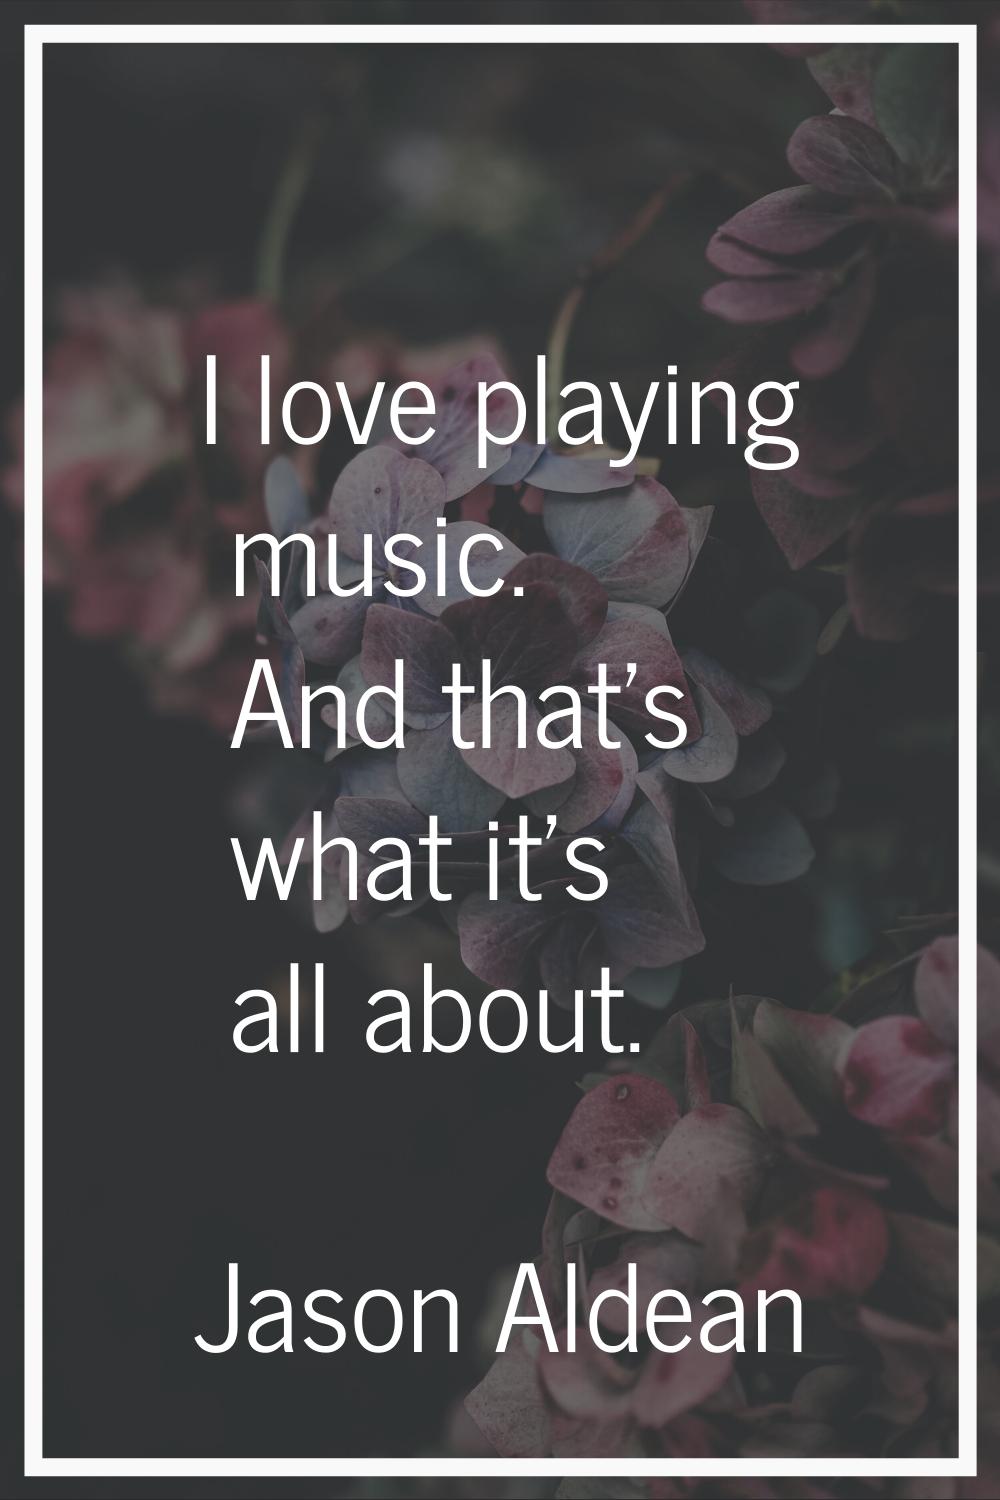 I love playing music. And that's what it's all about.